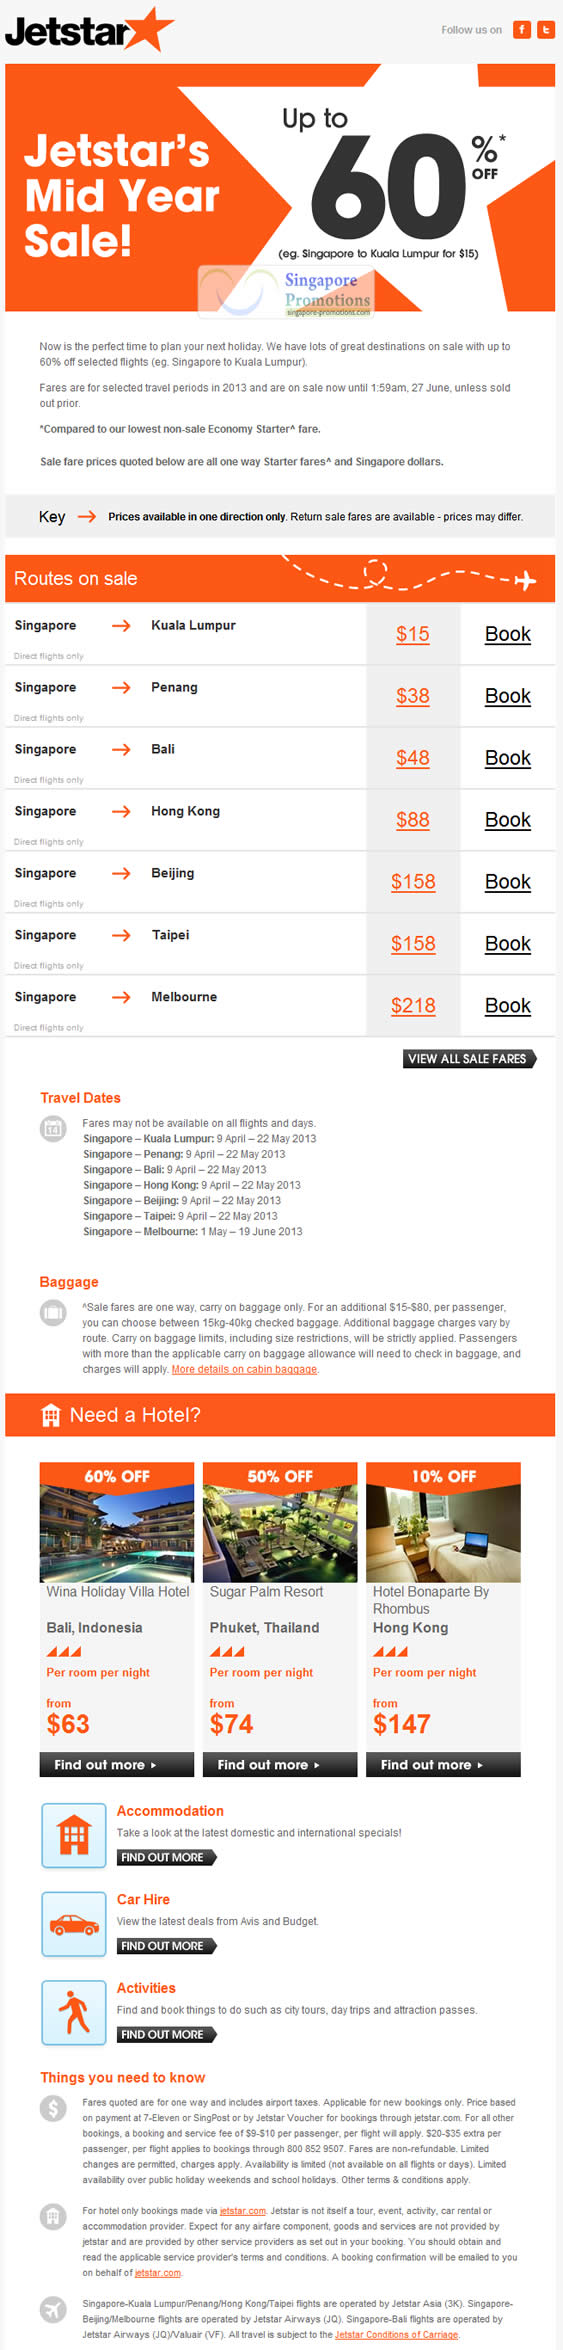 Featured image for (EXPIRED) Jetstar Airways Mid Year Sale Up To 60% Off 25 – 27 Jun 2012